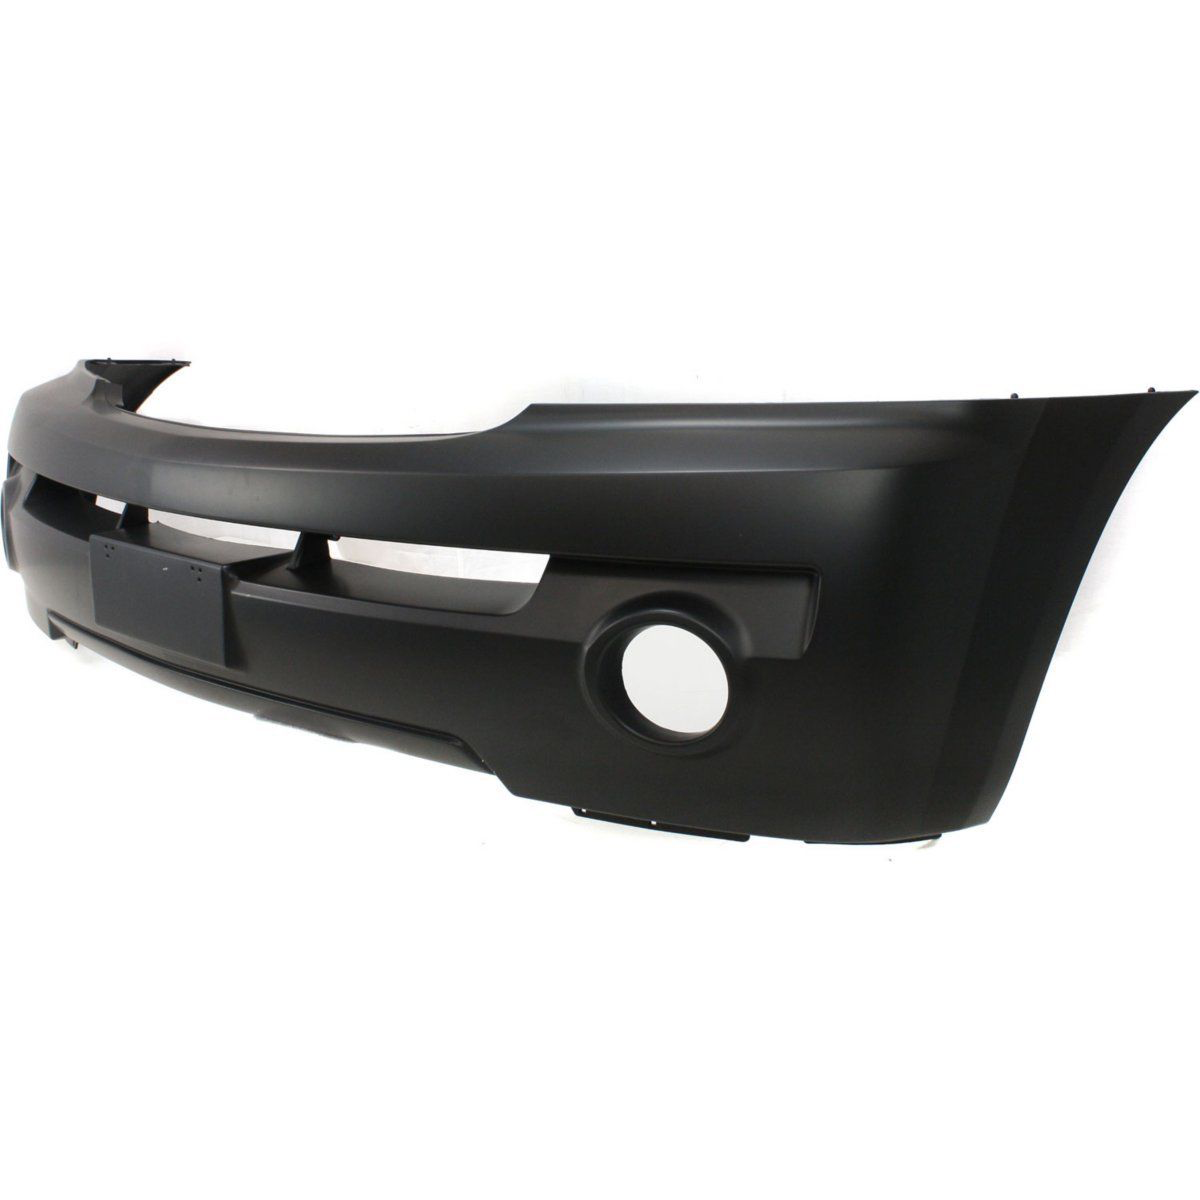 2003-2006 KIA SORENTO Front Bumper Cover LX Painted to Match